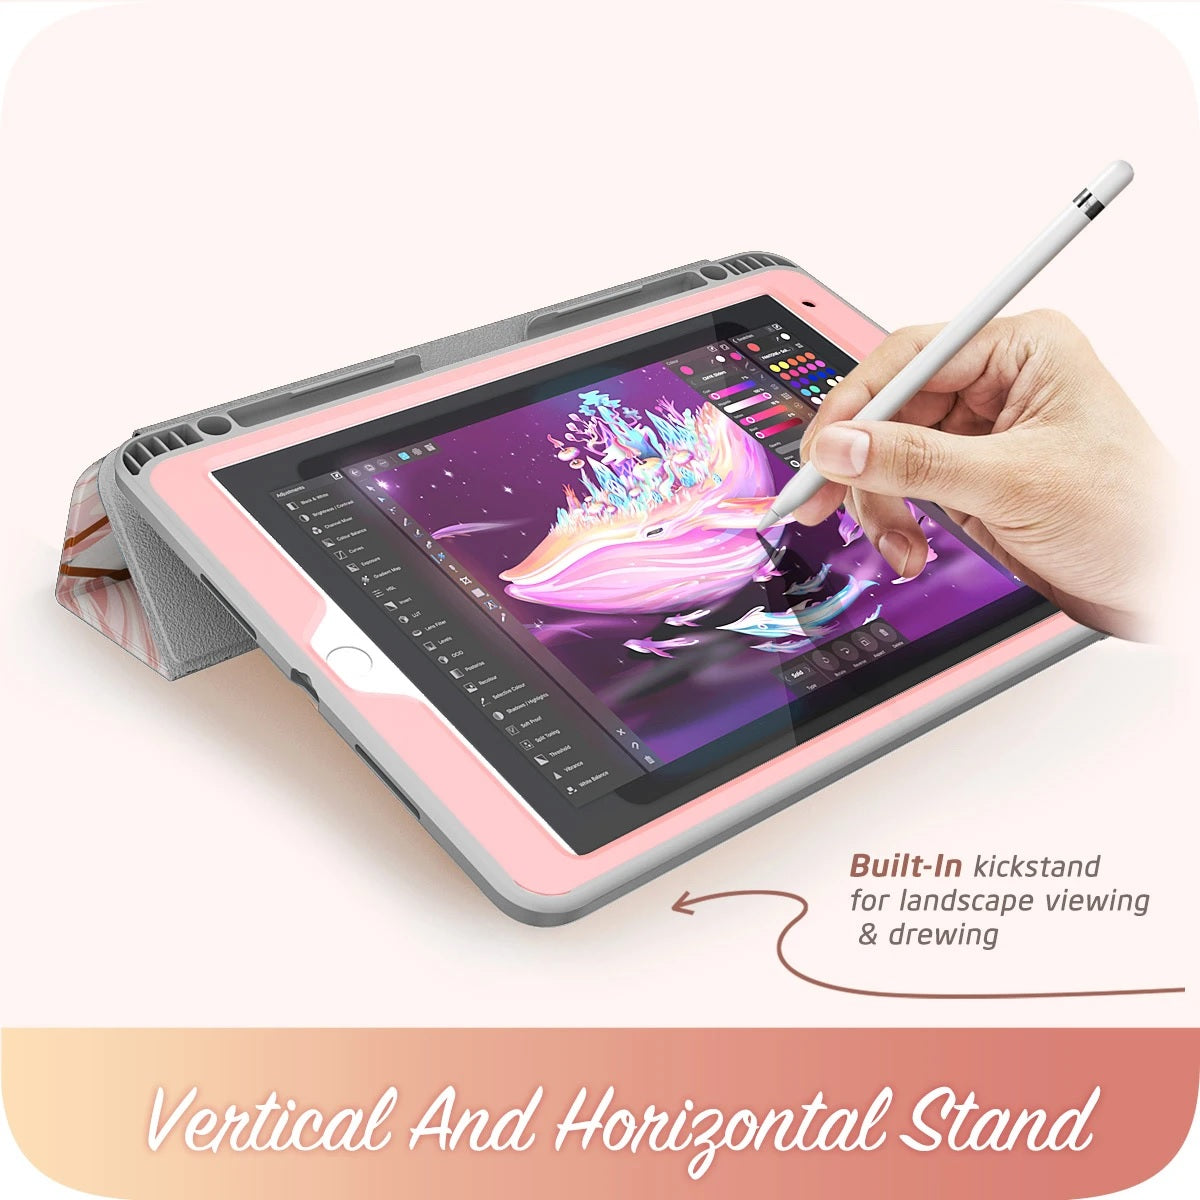 Shop and buy i-i-Blason Cosmo Case iPad 10.2" (2021/2020/2019) Built-in Screen Protector & Apple Pencil Holder| Casefactorie® online with great deals and sales prices with fast and safe shipping. Casefactorie is the largest Singapore official authorised retailer for the largest collection of mobile premium accessories.